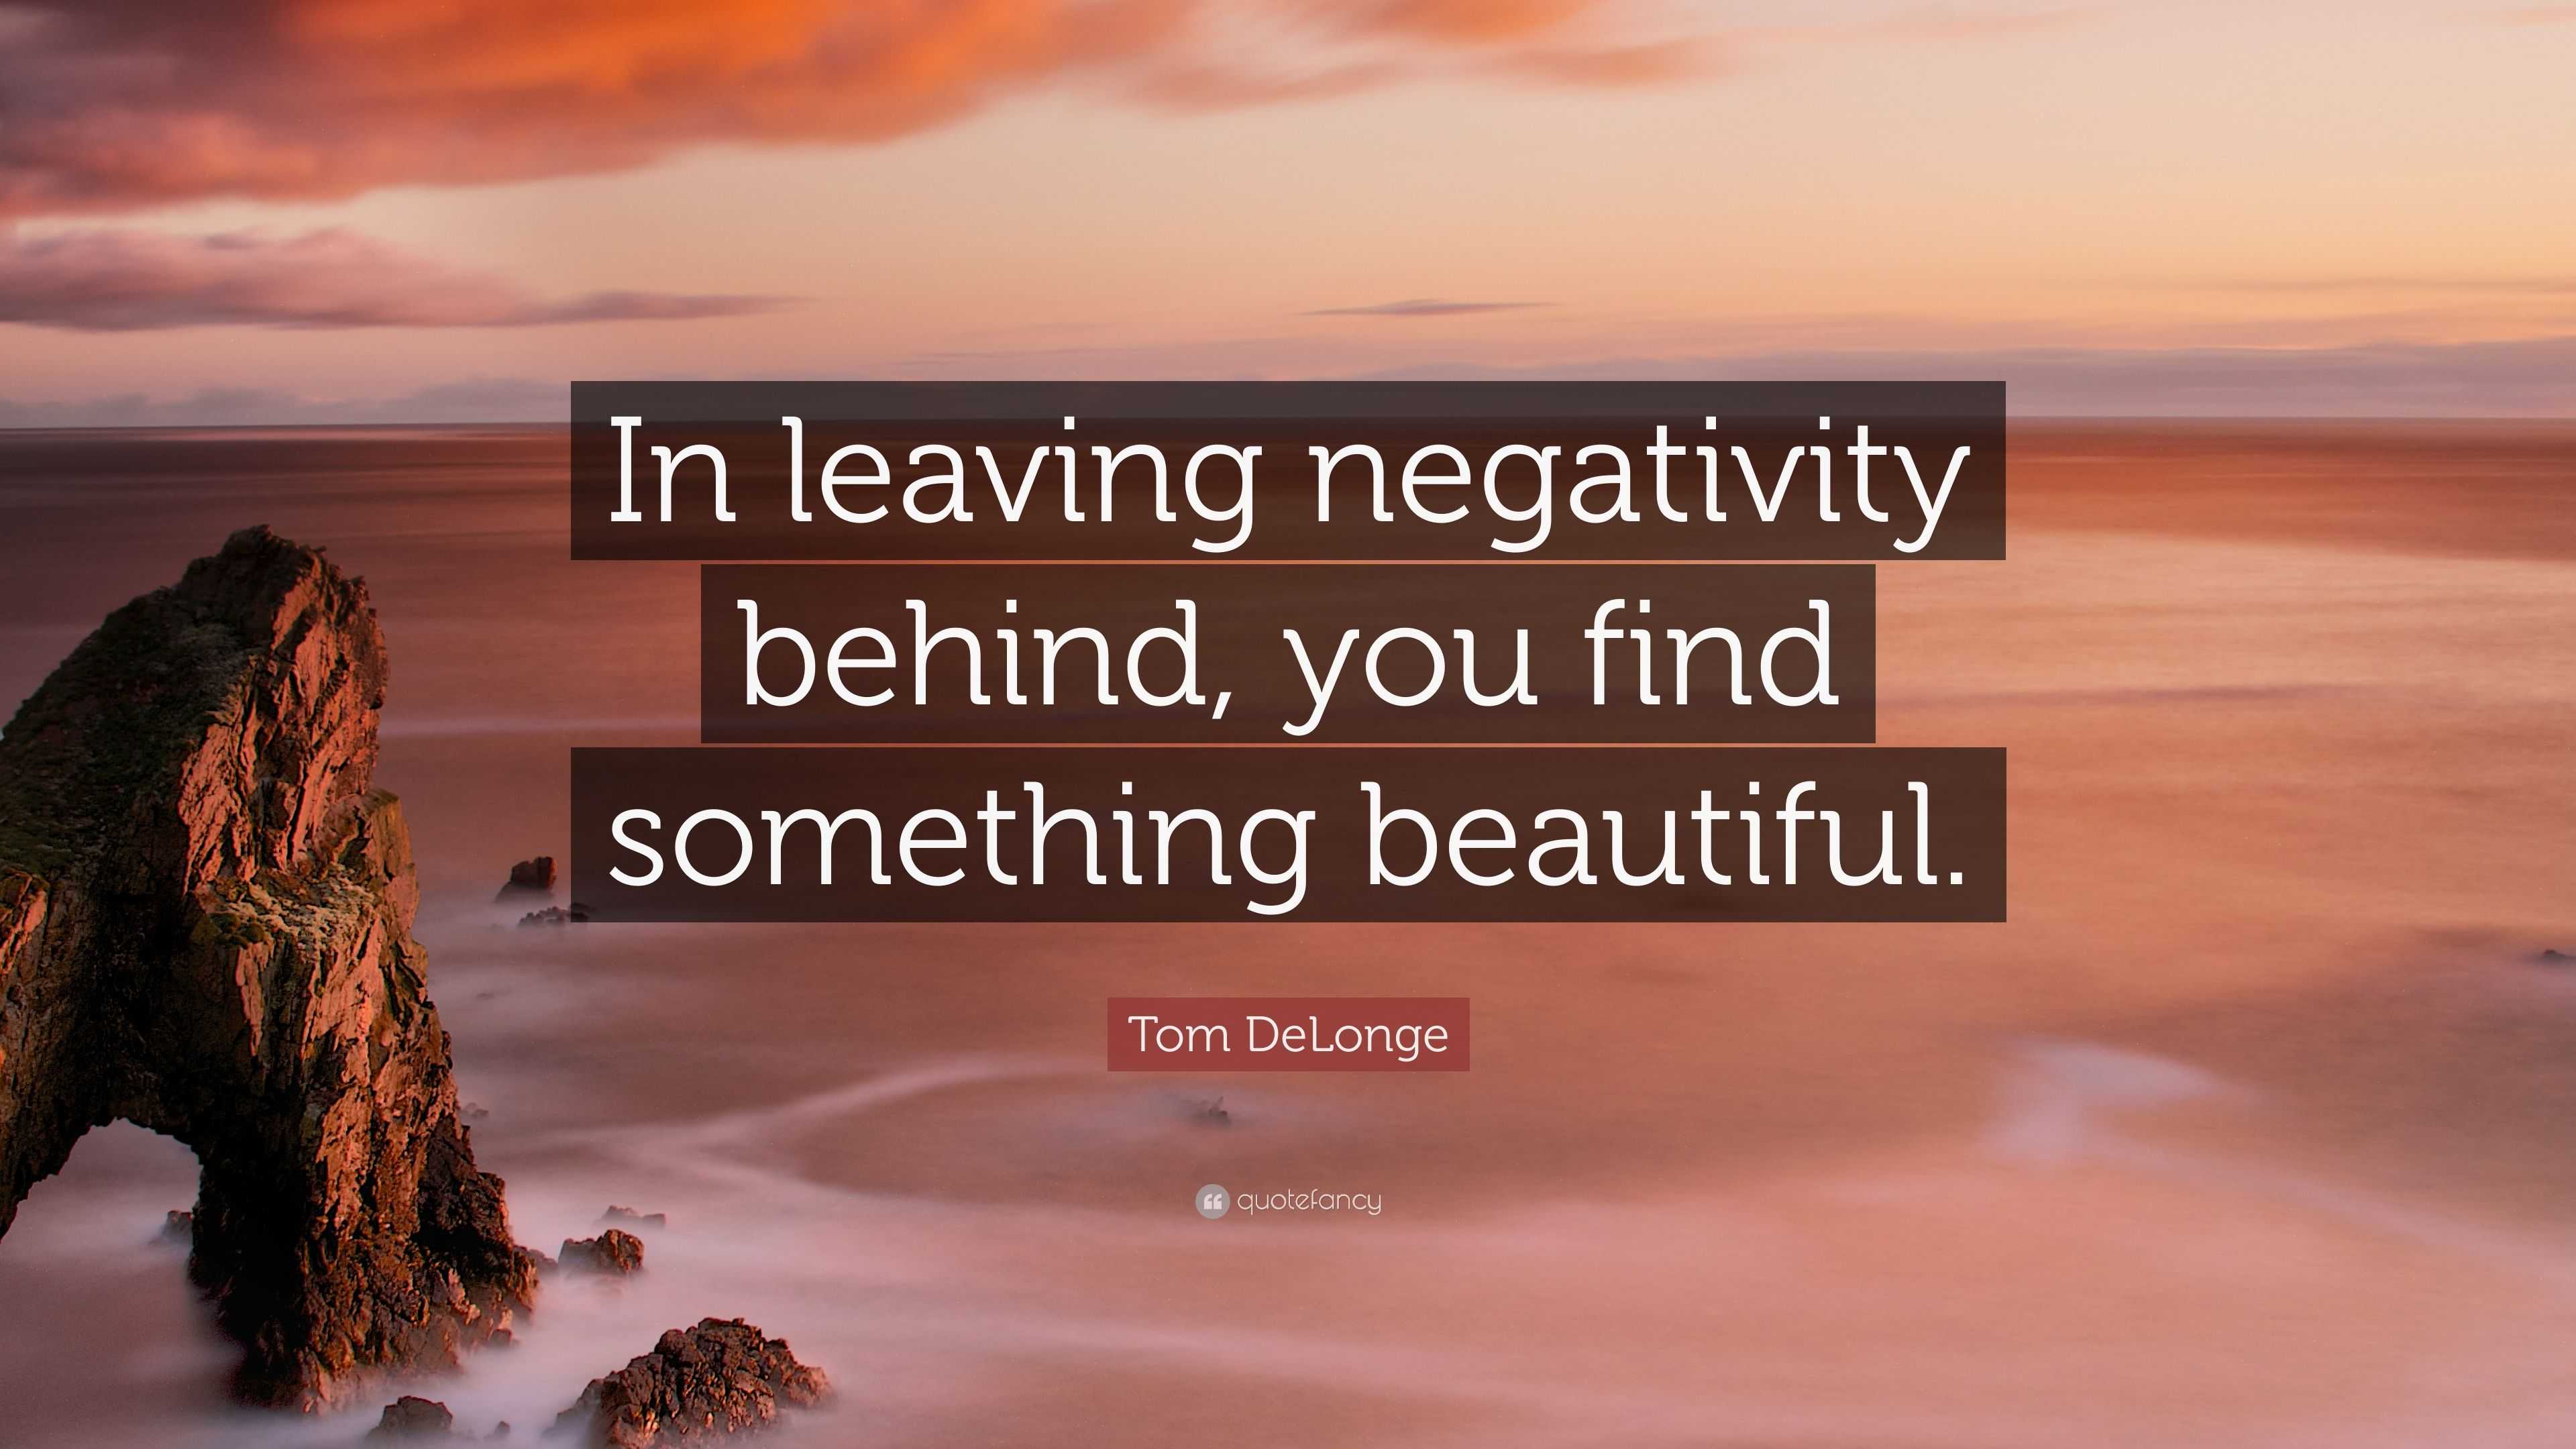 Tom DeLonge Quote: “In leaving negativity behind, you find something